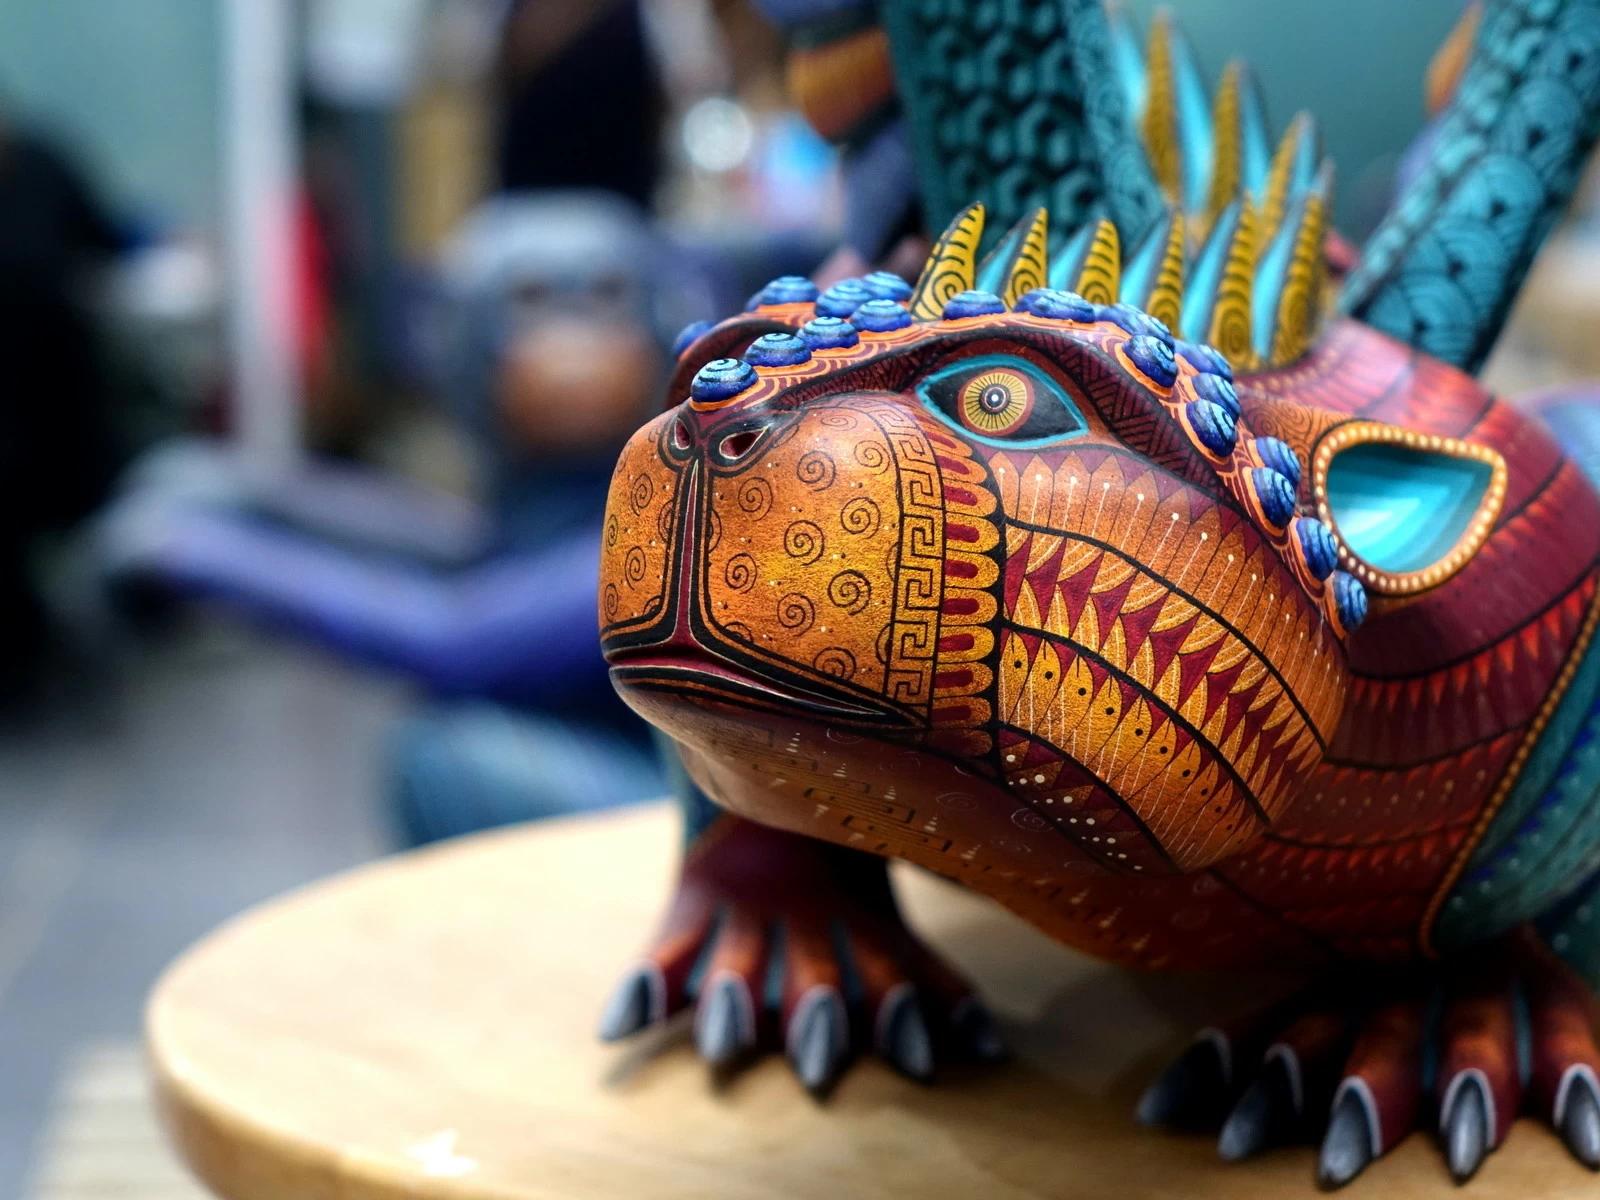 Alebrijes or wood crafted and painted with beautiful colours inspired by Zapotec cultural perspective and meaning in life can be seen in San Martin Tilcajete village in Oaxaca state. At Jacobo and Maria uses all natural colours. Photo and story credits by Korakot Punlopruksa